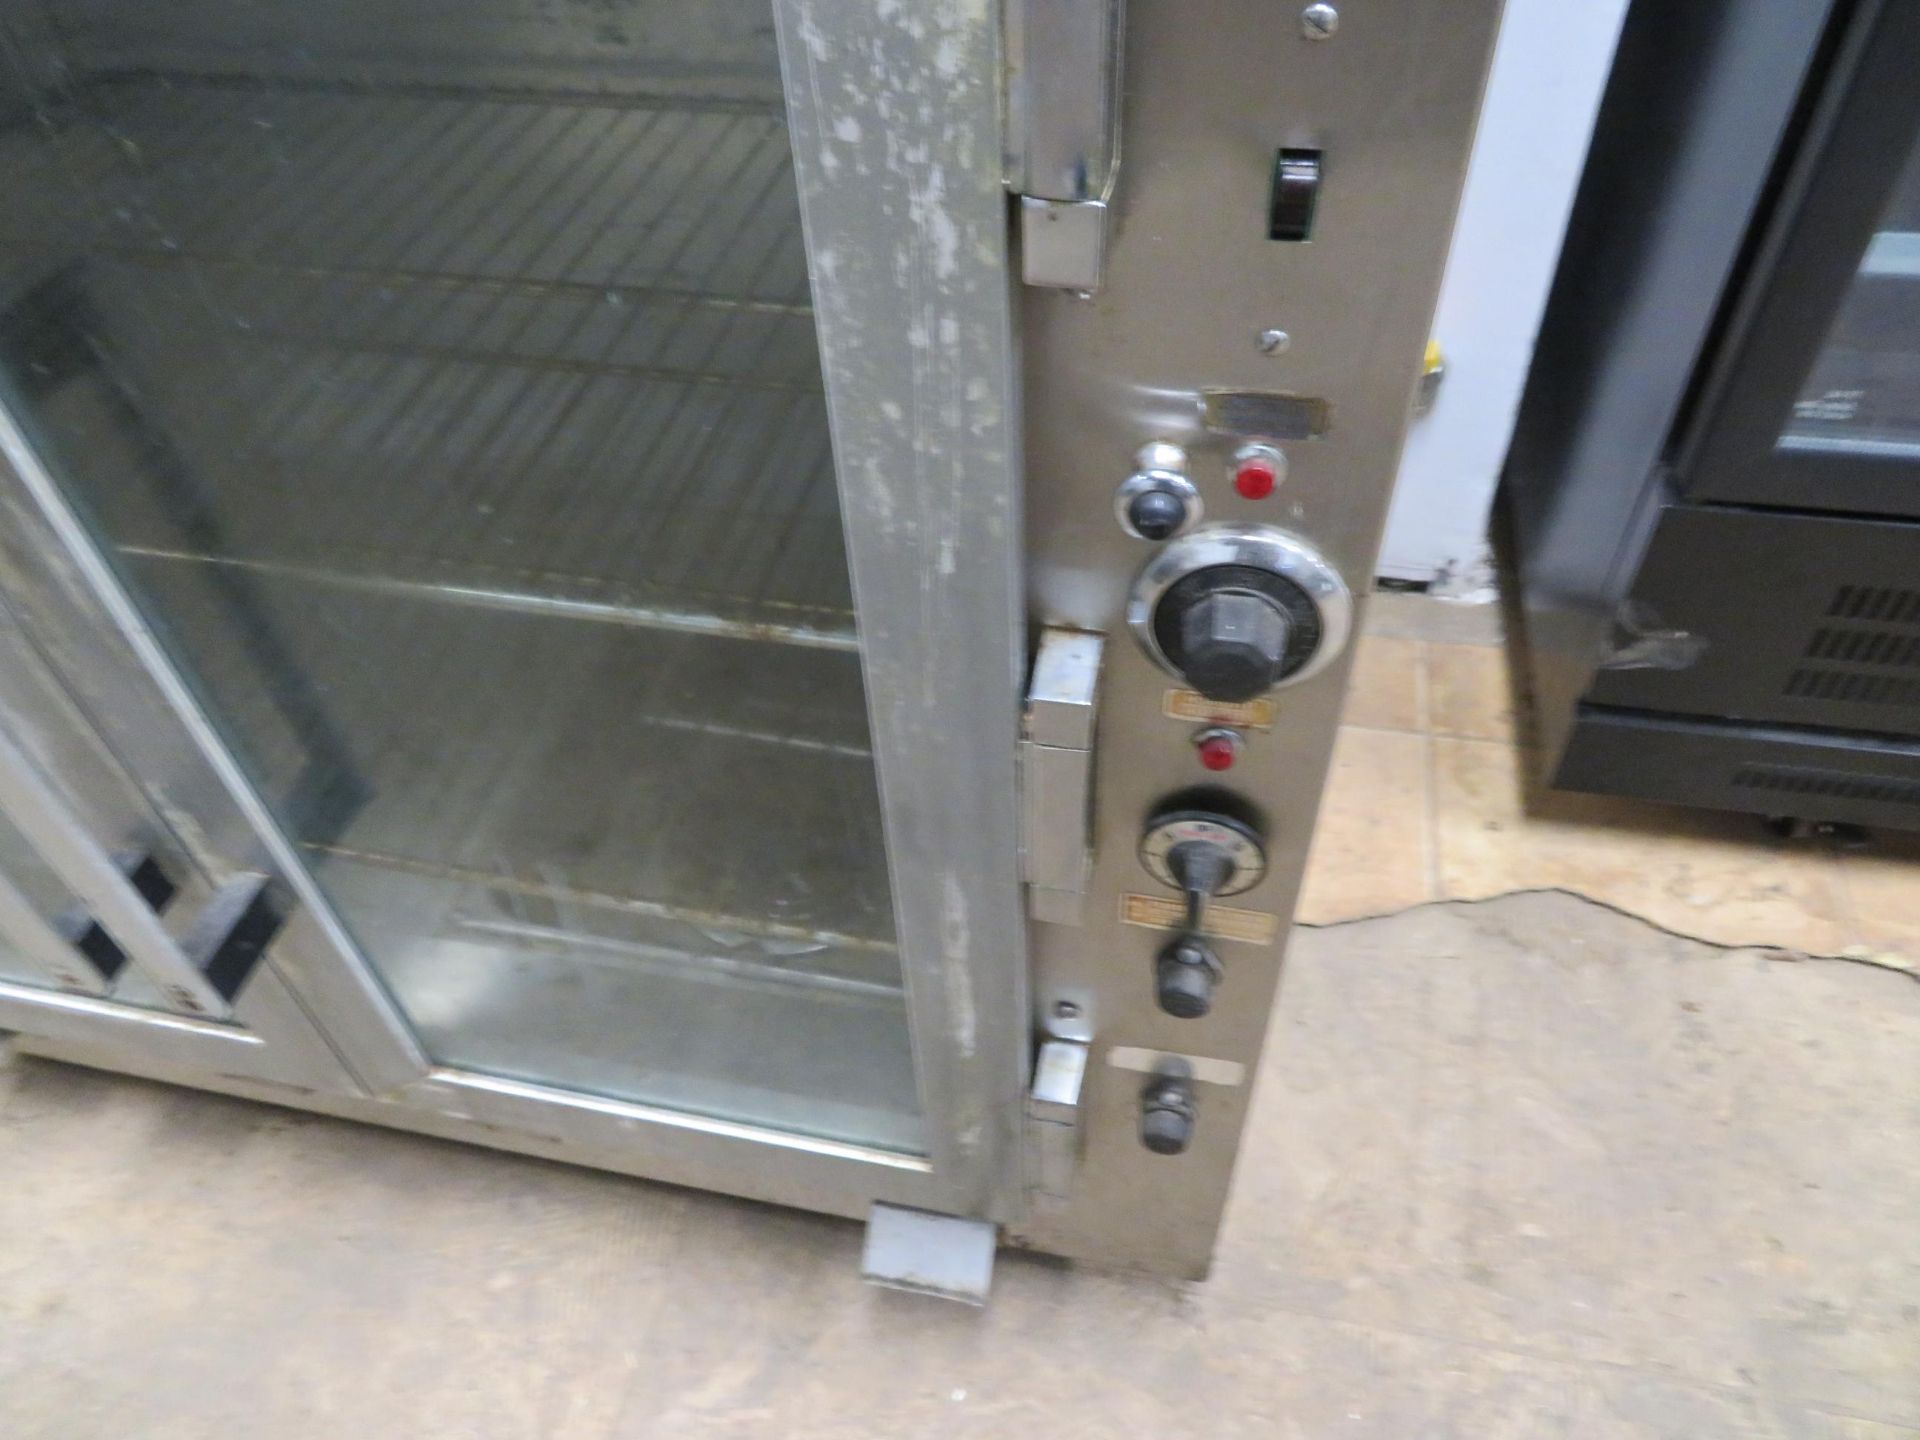 BRUTE double commercial gas oven on wheels approx. 40"w x 31"d x 74"h - Image 5 of 5